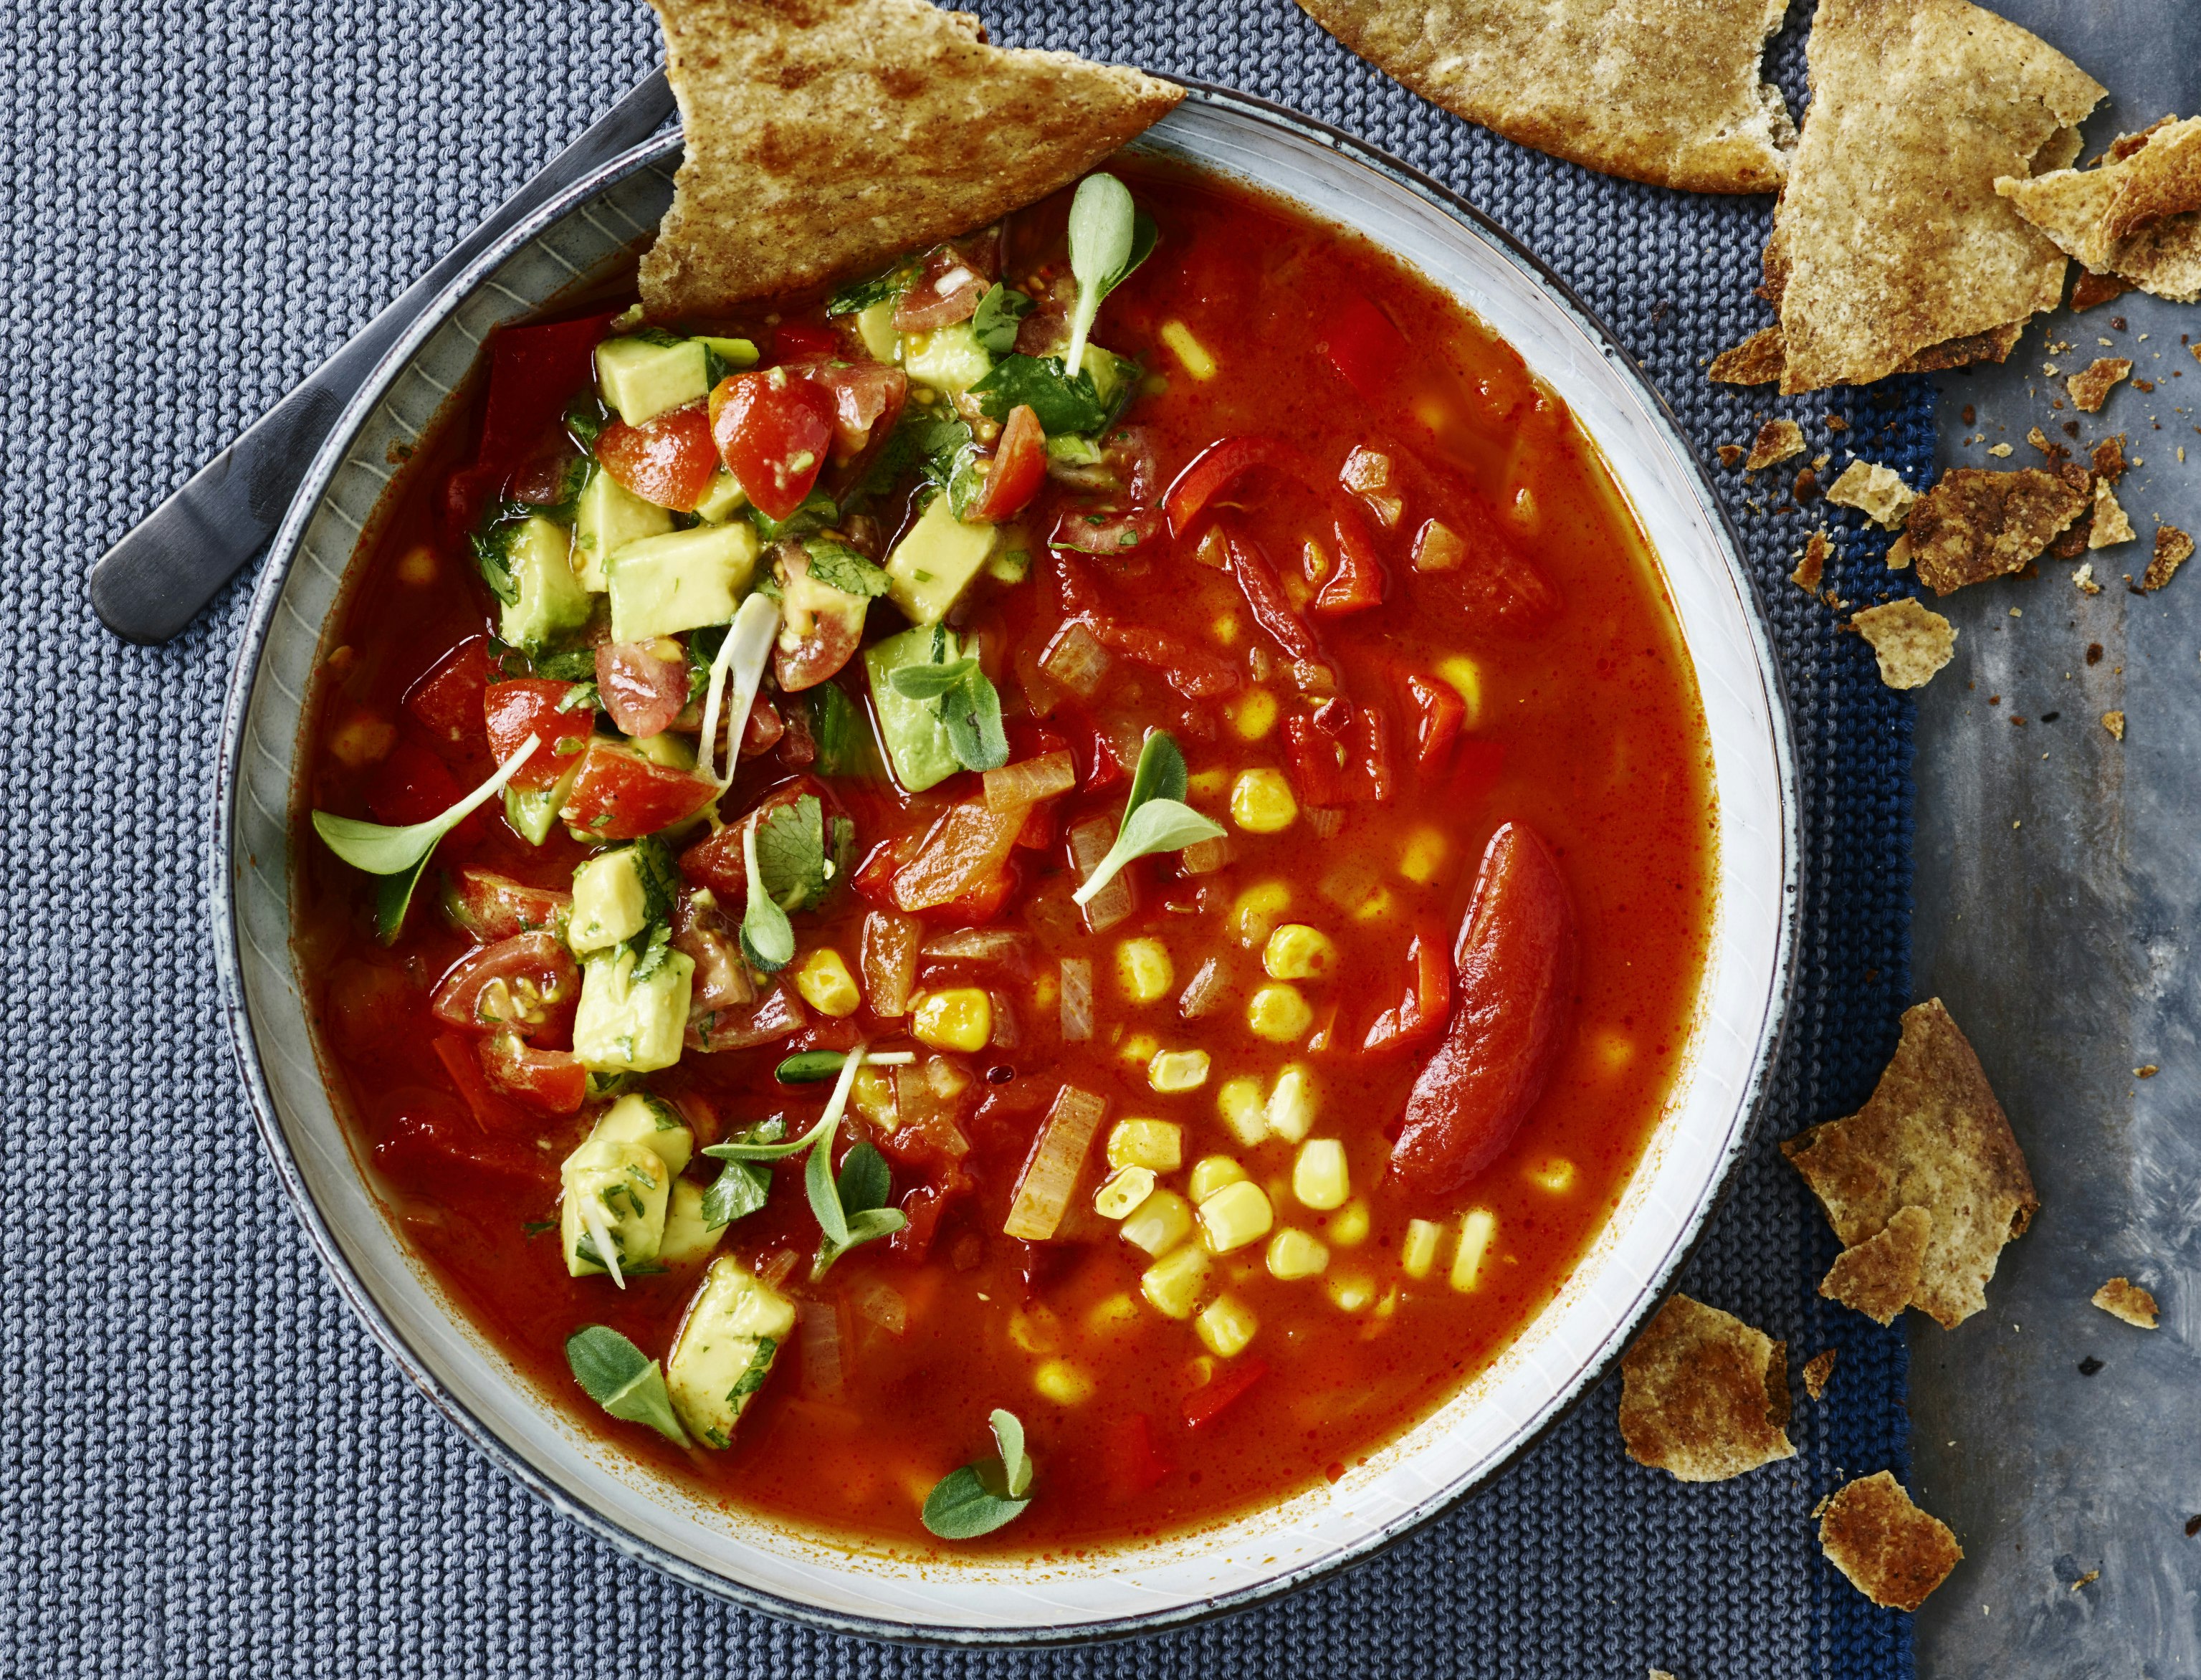 Spicy tomatsuppe med avocadosalsa